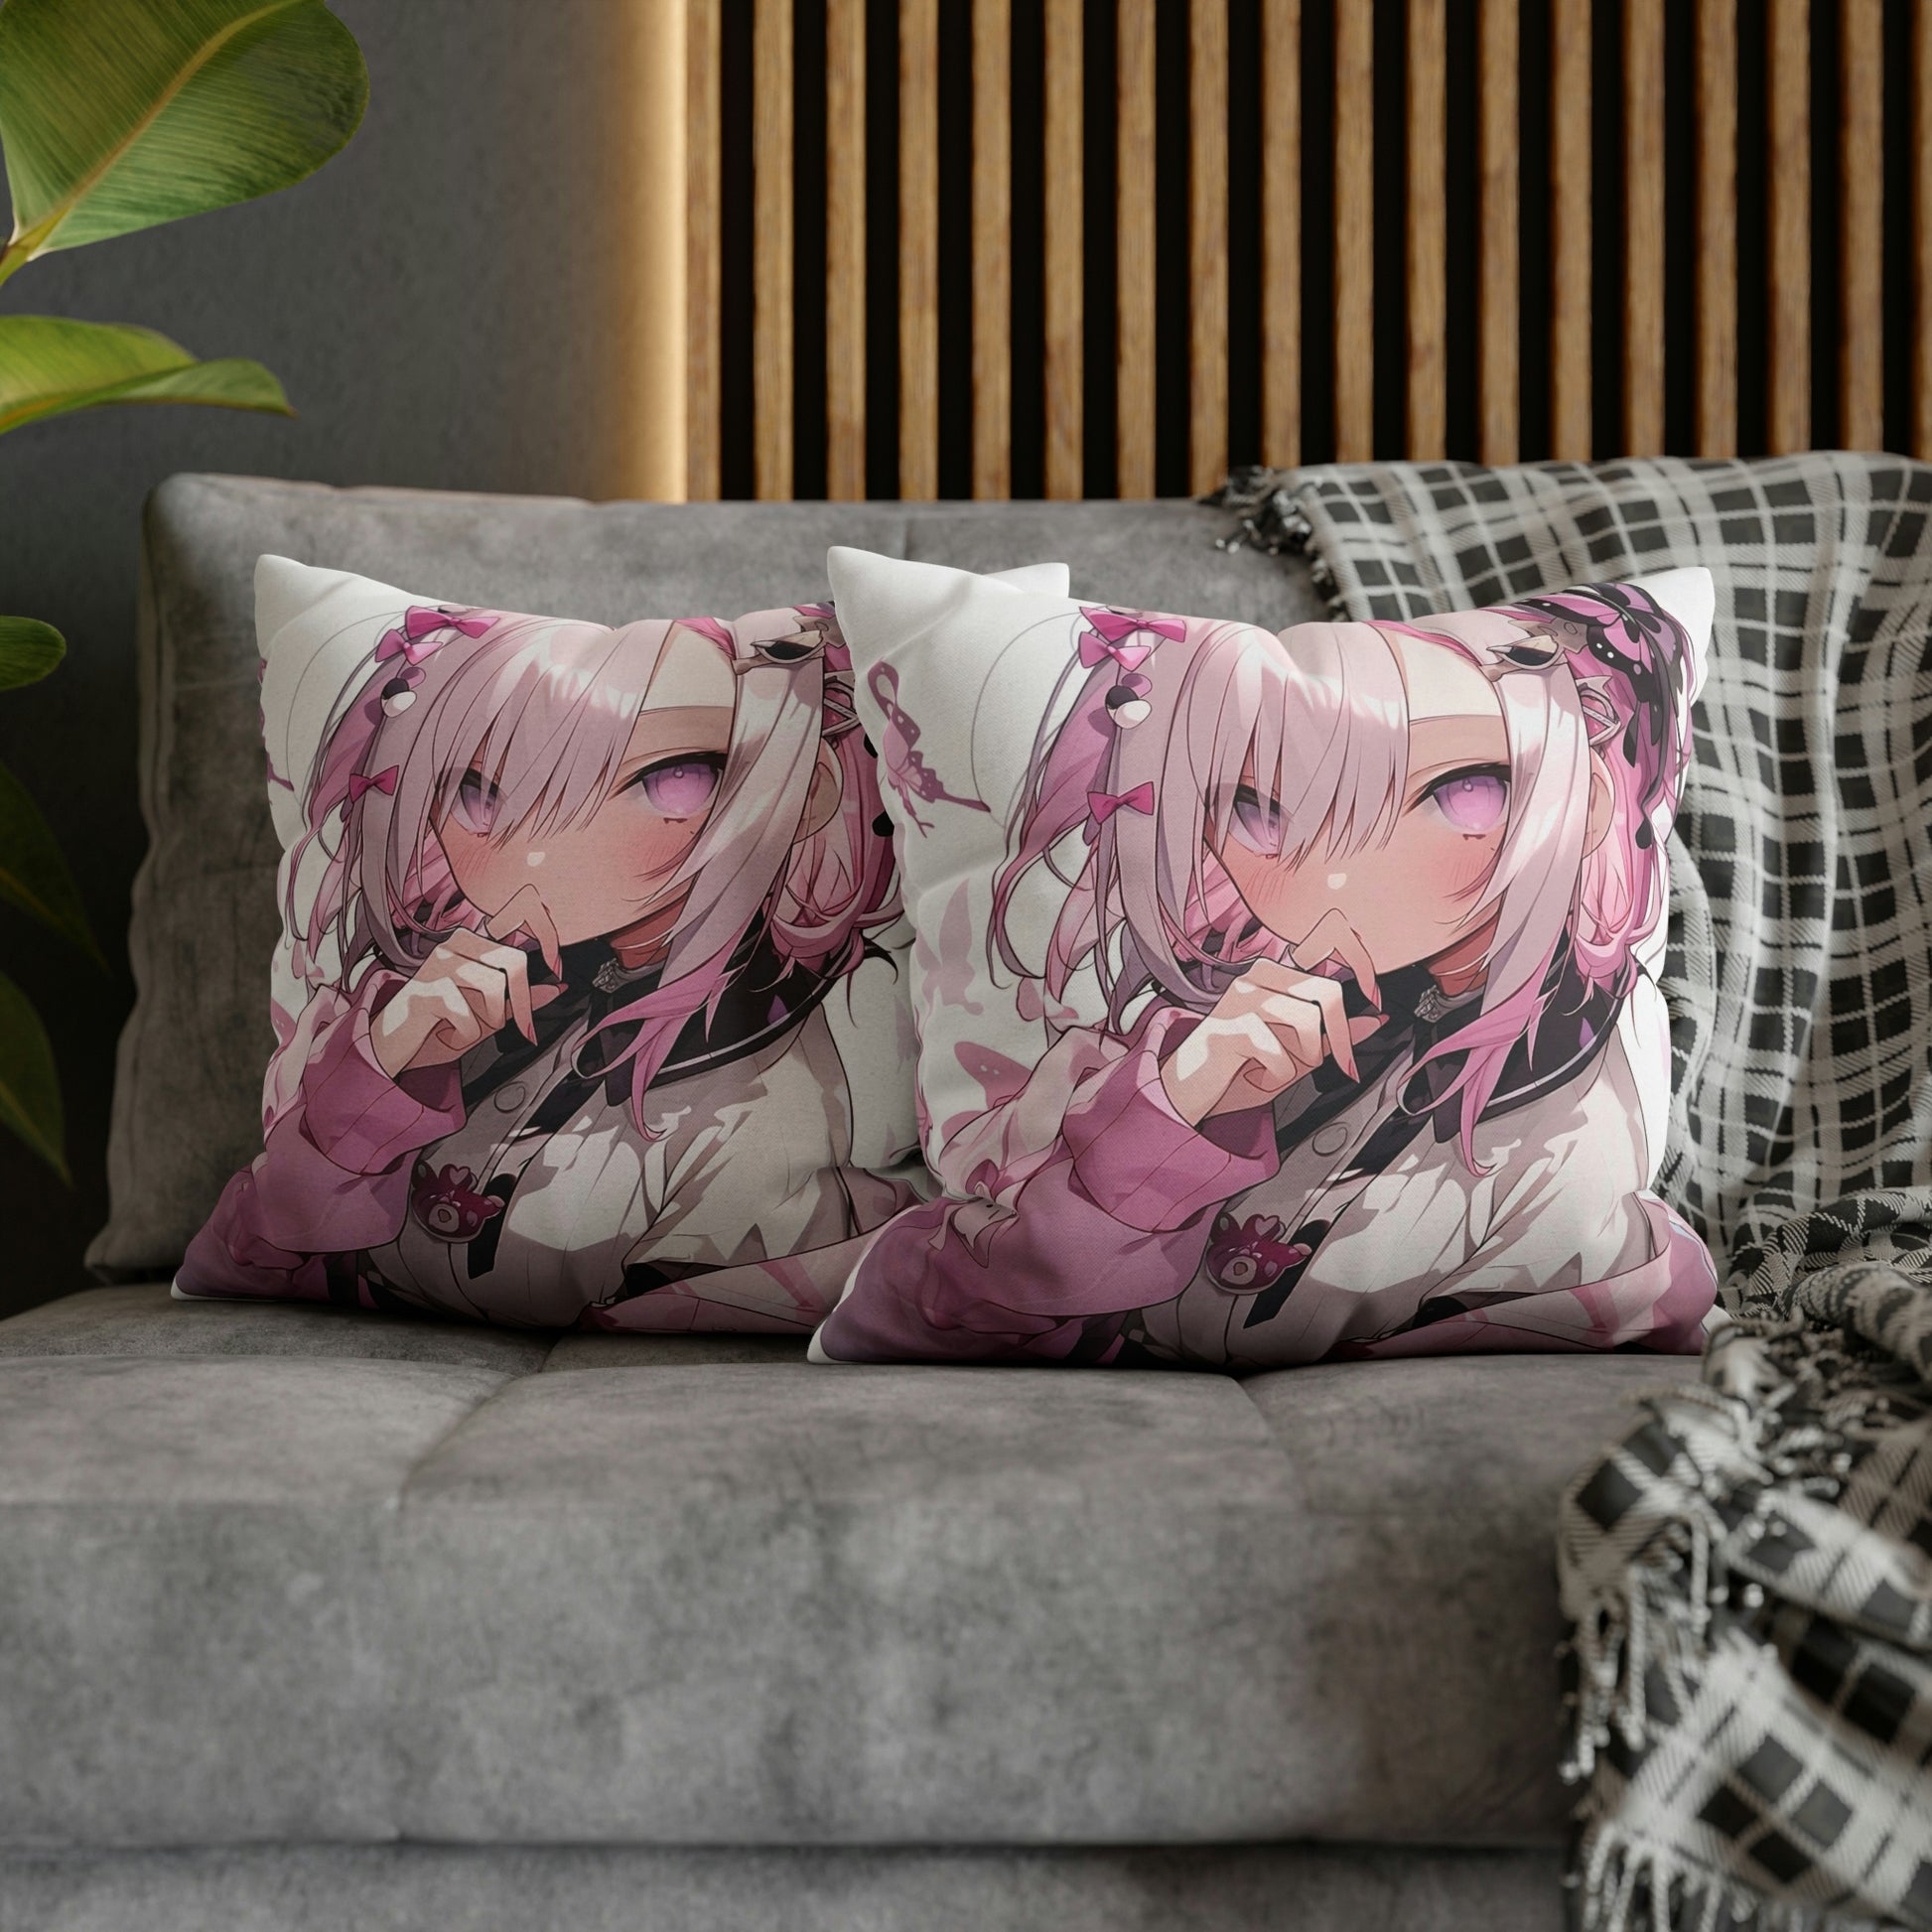 Anime Girl Pillow Case, Pink Square Throw Decorative Cover Room Décor Floor Couch Cushion 20 x 20 Zipper Sofa Starcove Fashion